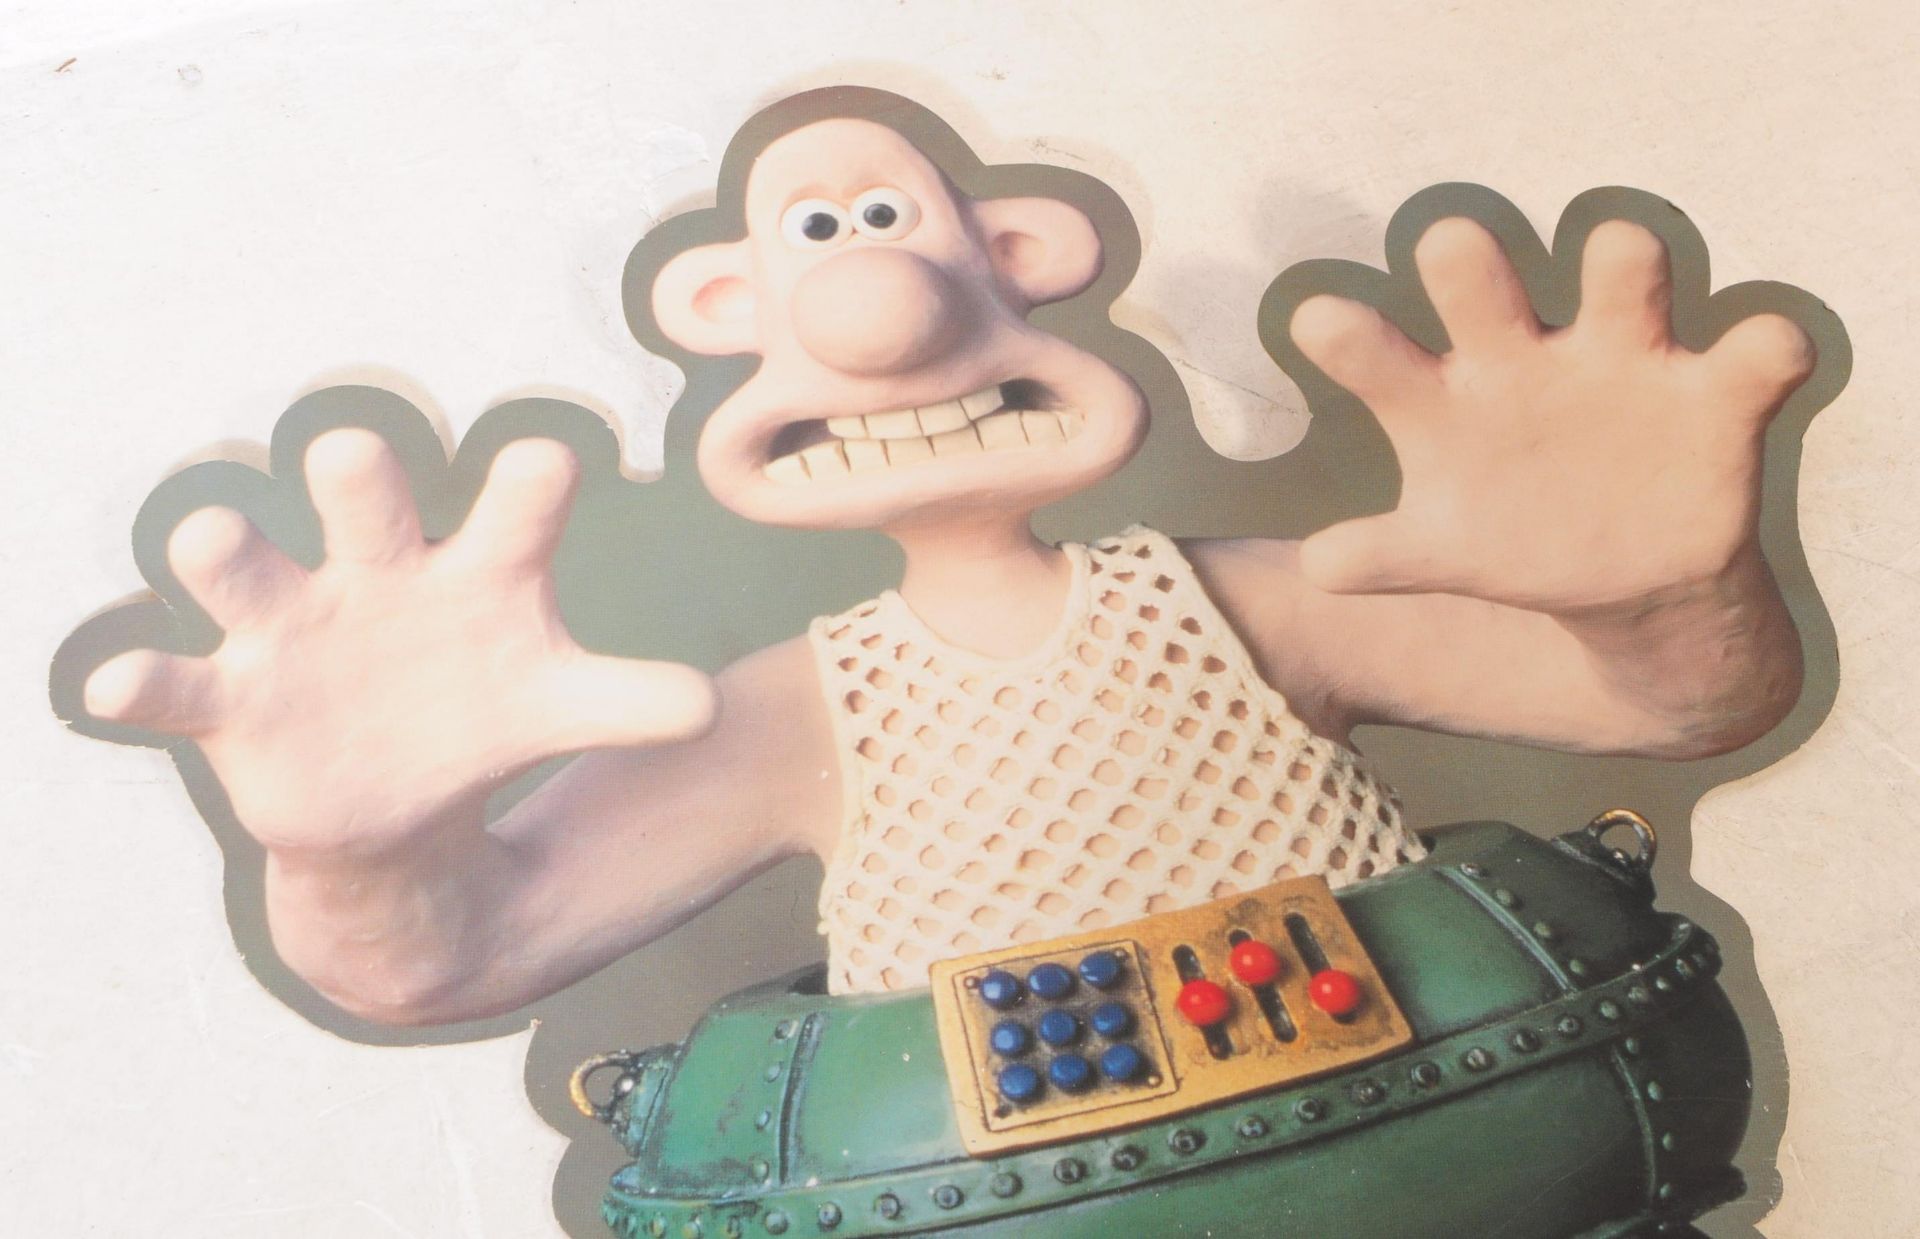 WALLACE & GROMIT - LATE 20TH CENTURY TV CARDBOARD CUT OUT - Image 2 of 3